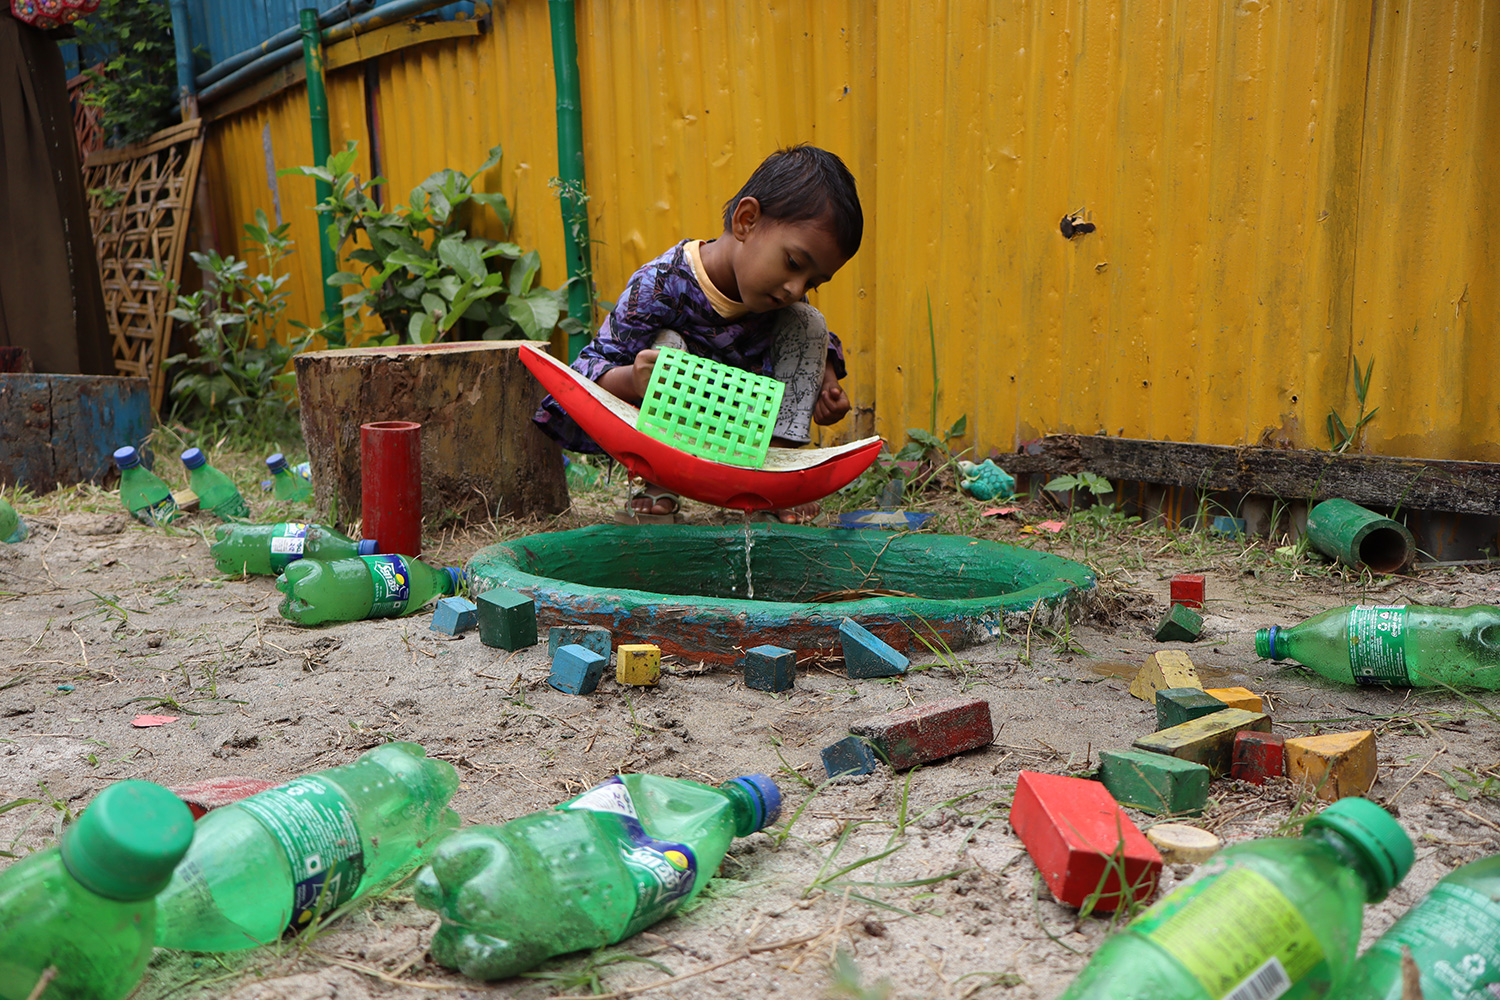 A boy in a Play Lab in Dhaka plays with water toys outside.